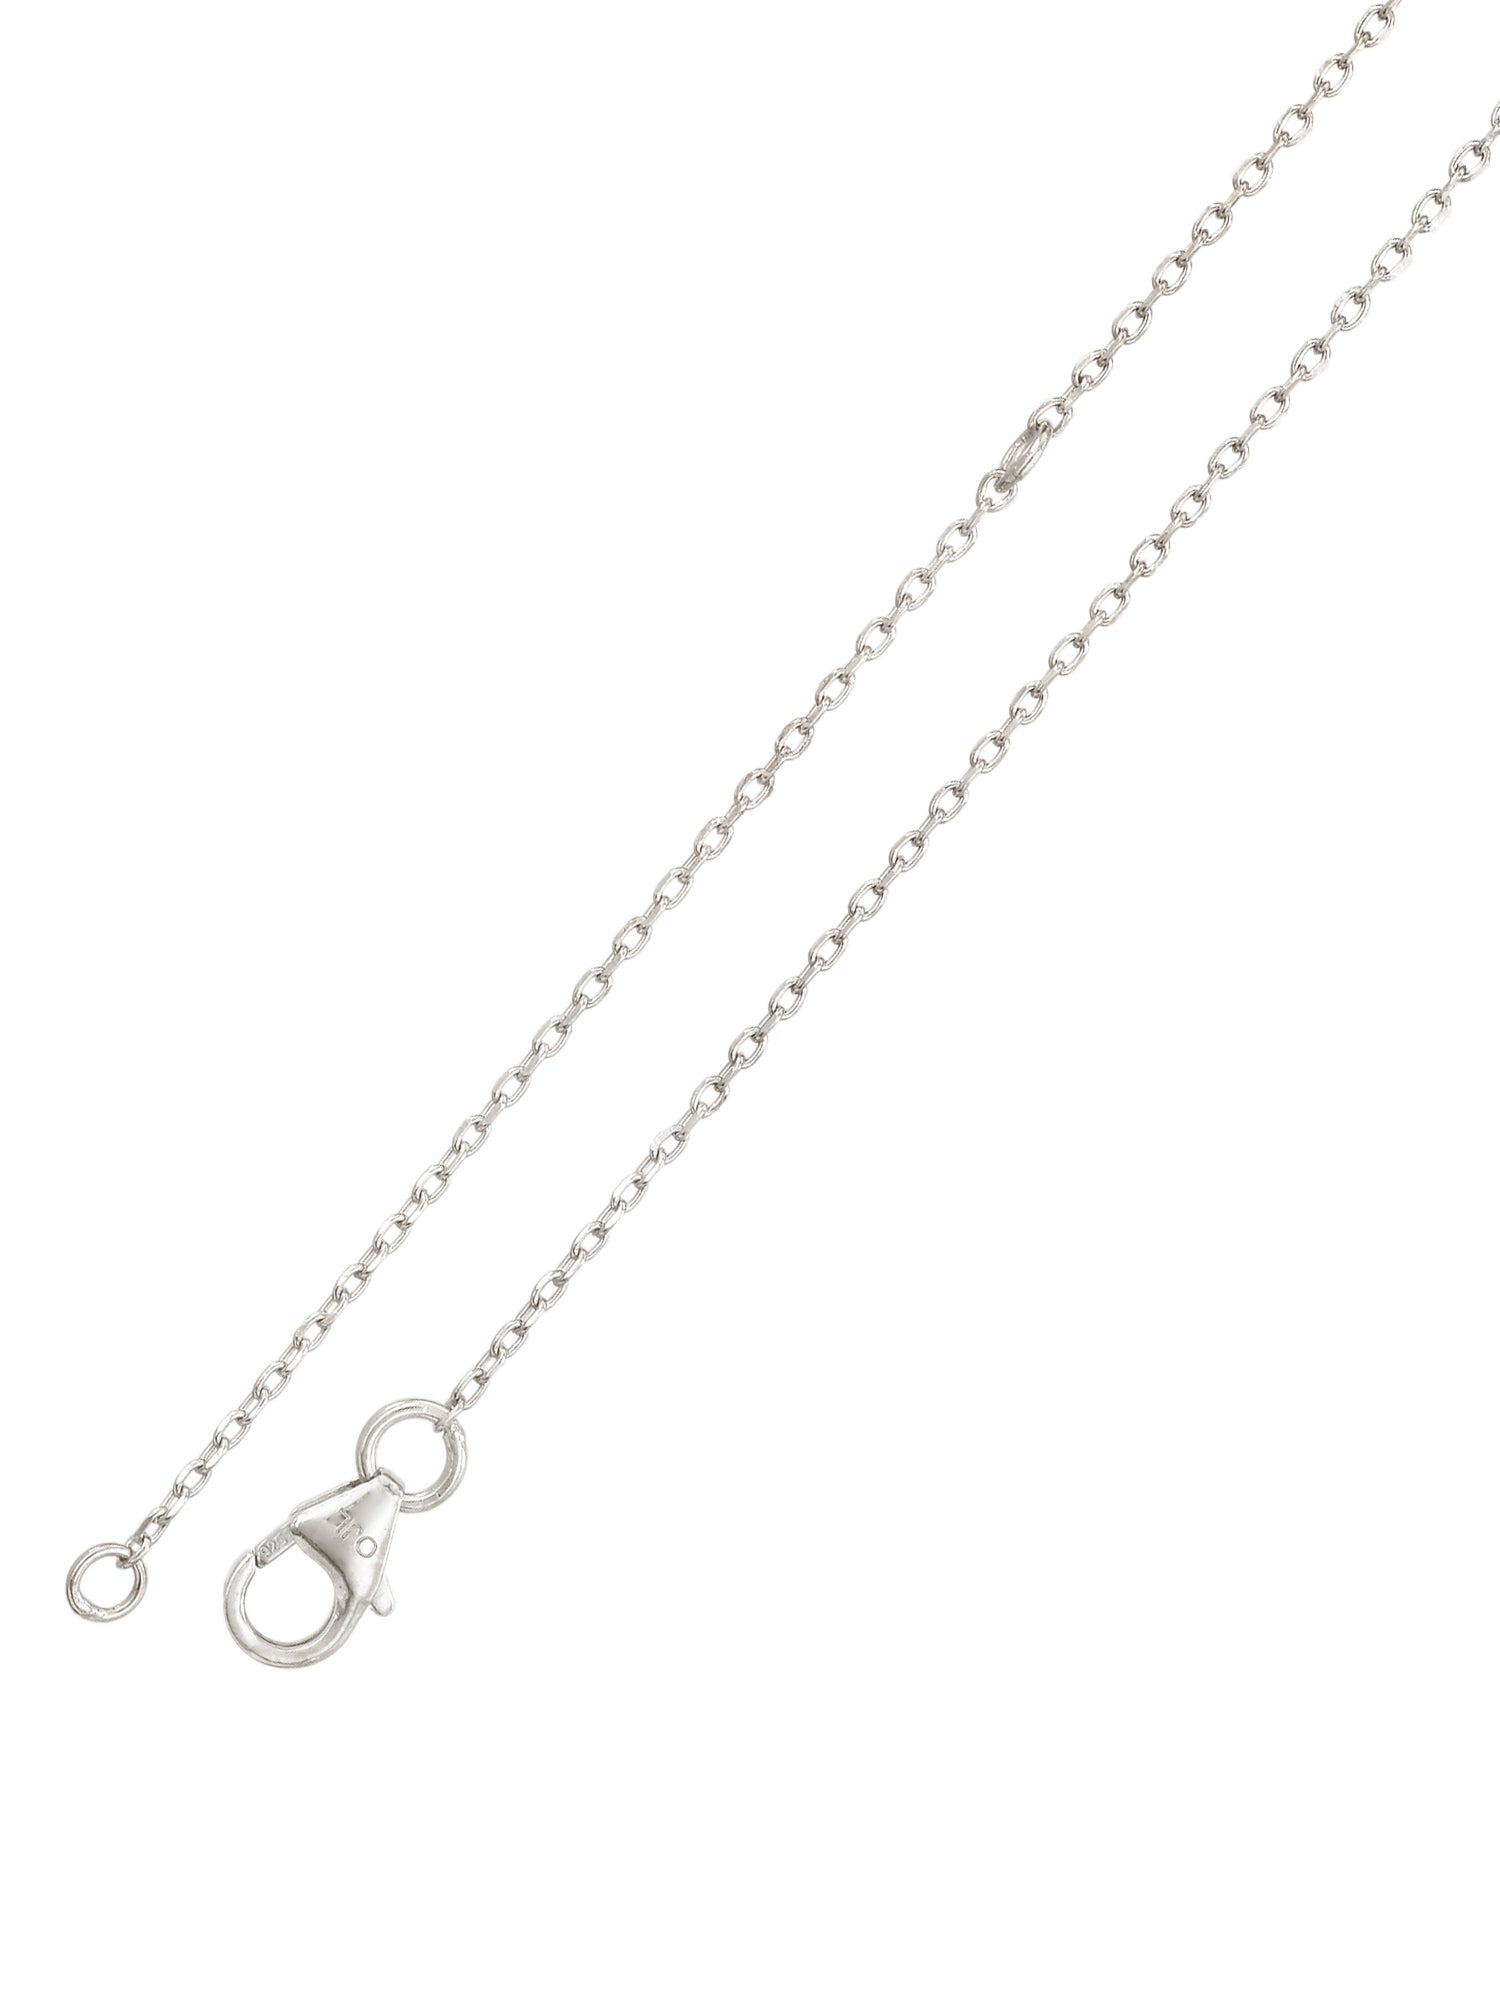 SOLITAIRE DROP PENDANT WITH PURE SILVER 18" CHAIN FOR WOMEN-4